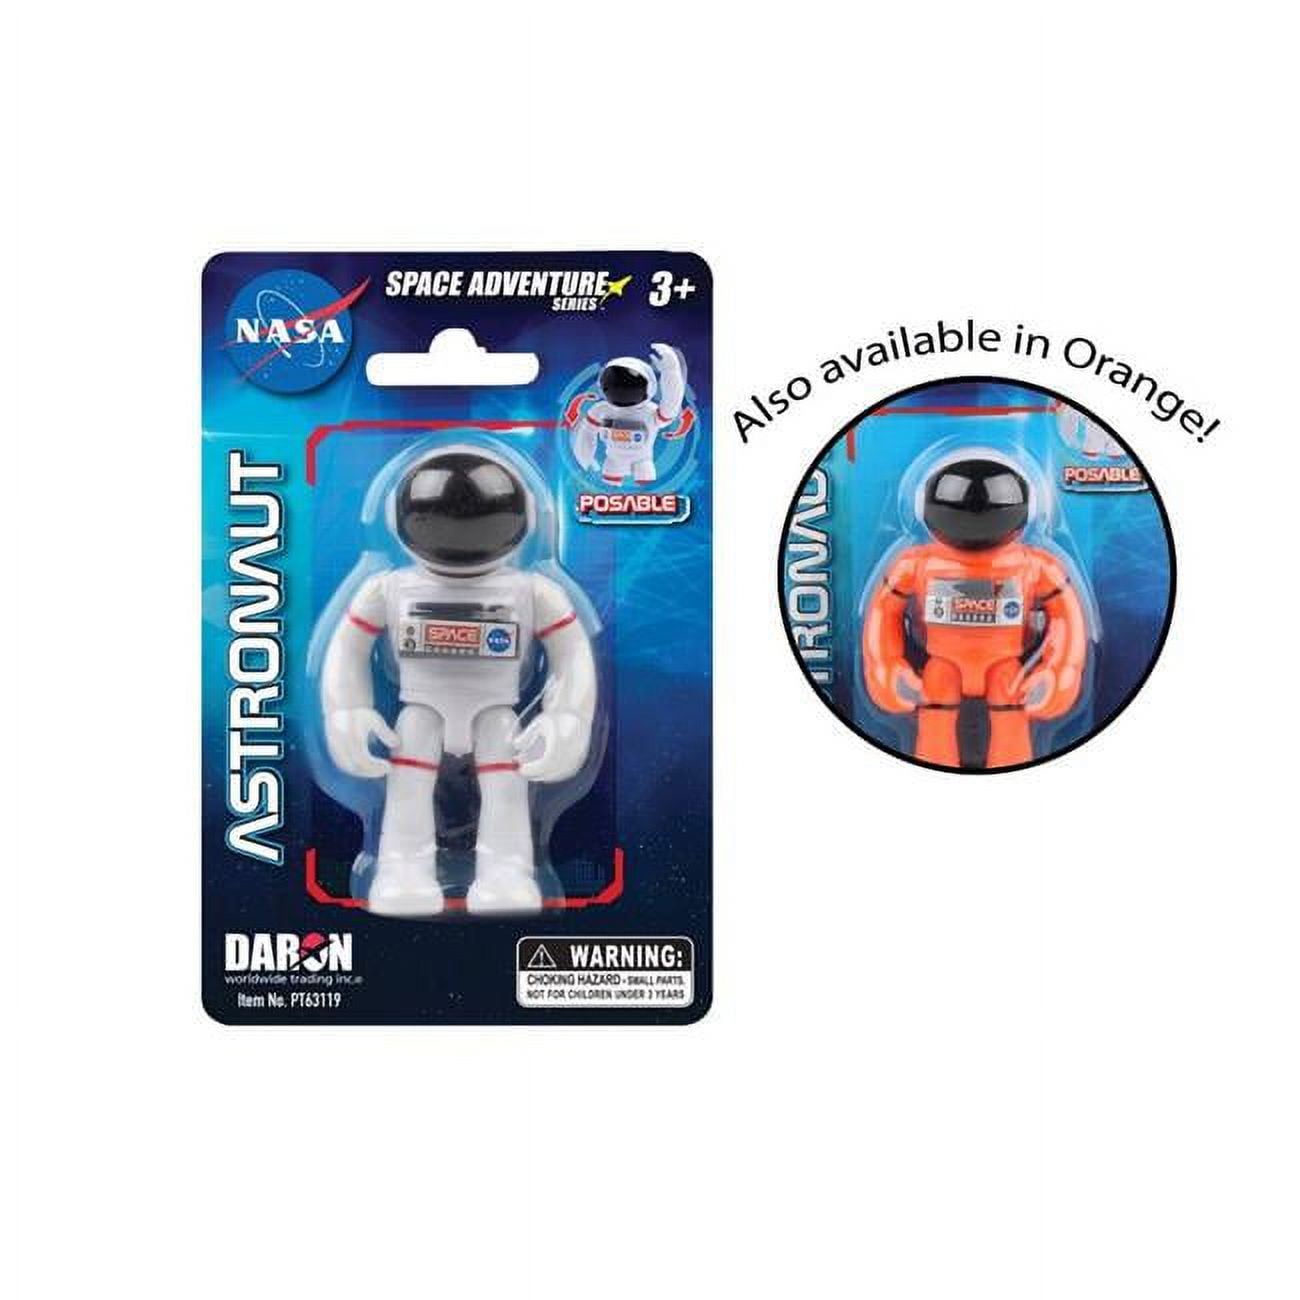 Picture of Daron Worldwide Trading PT63119 3 in. Space Adventure Astronaut Figure, Assoted Color